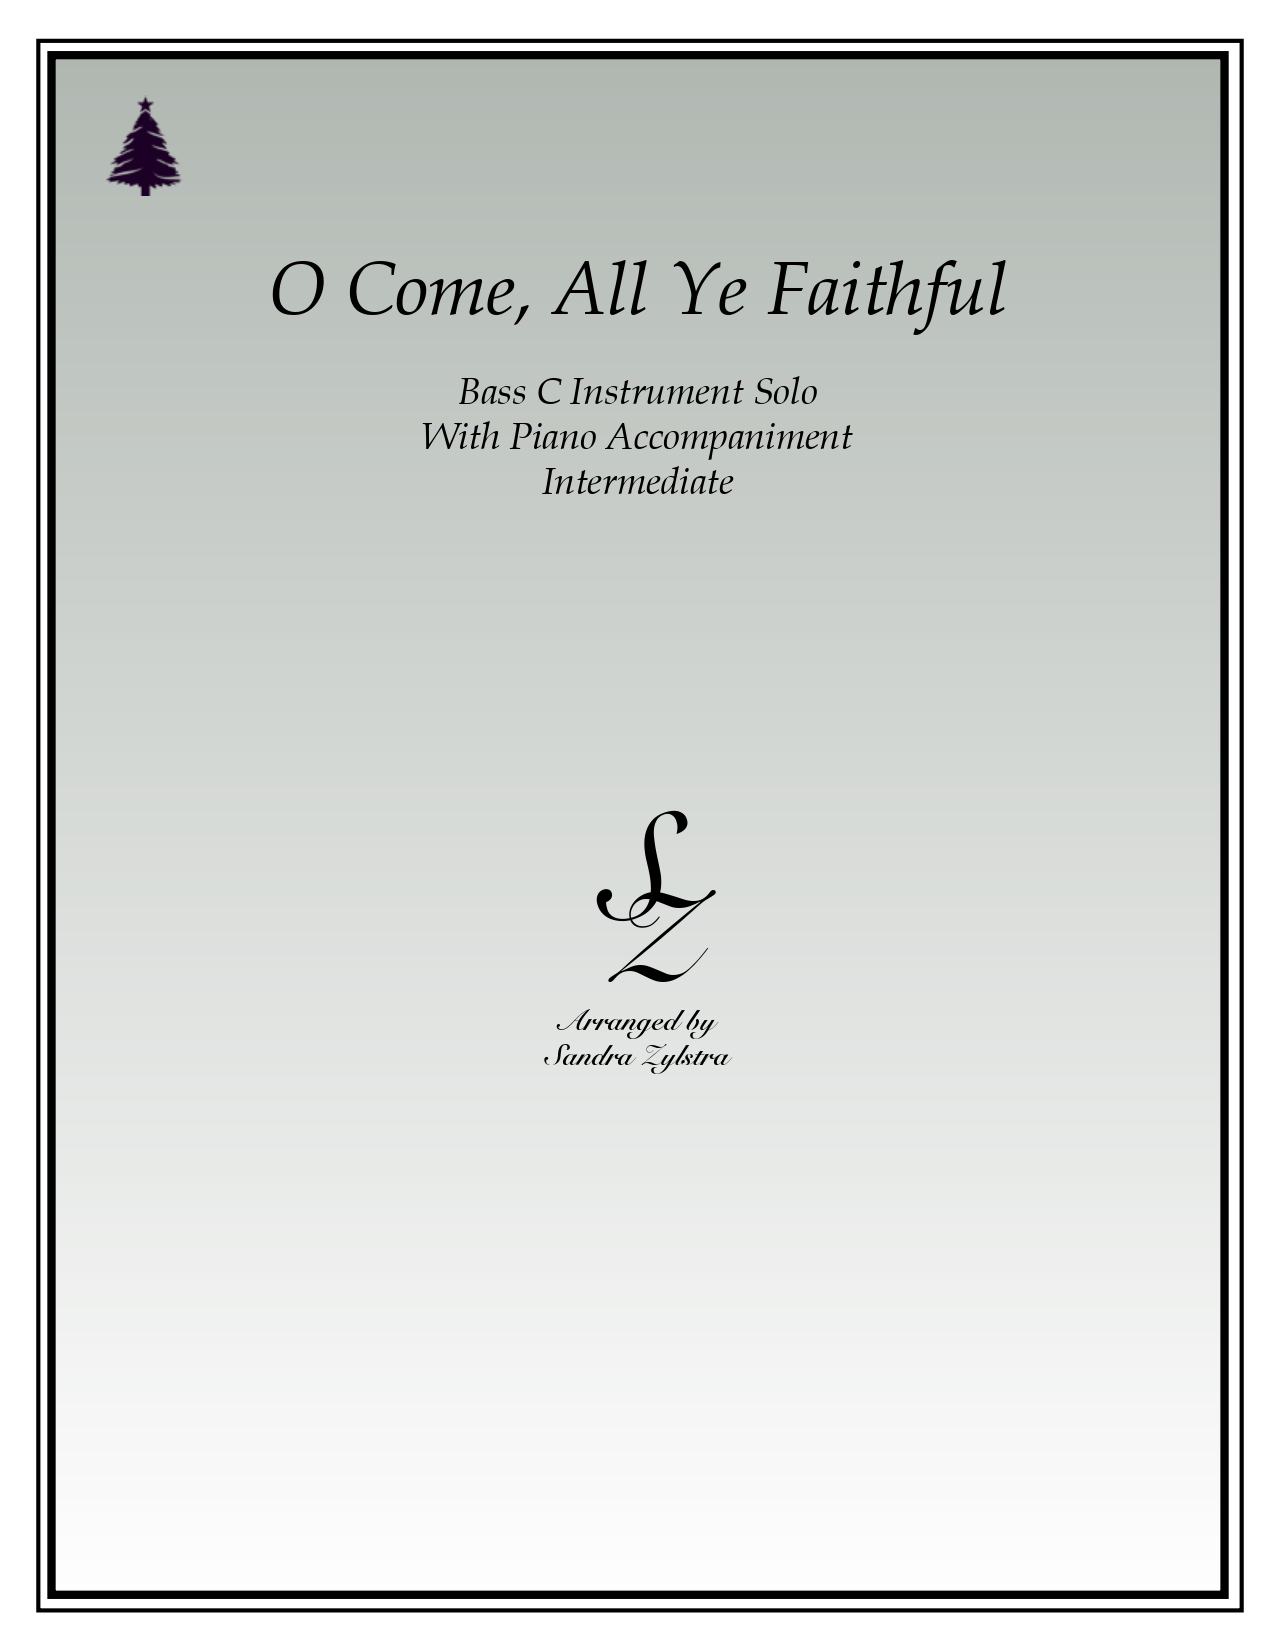 O Come All Ye Faithful bass C instrument solo part cover page 00011